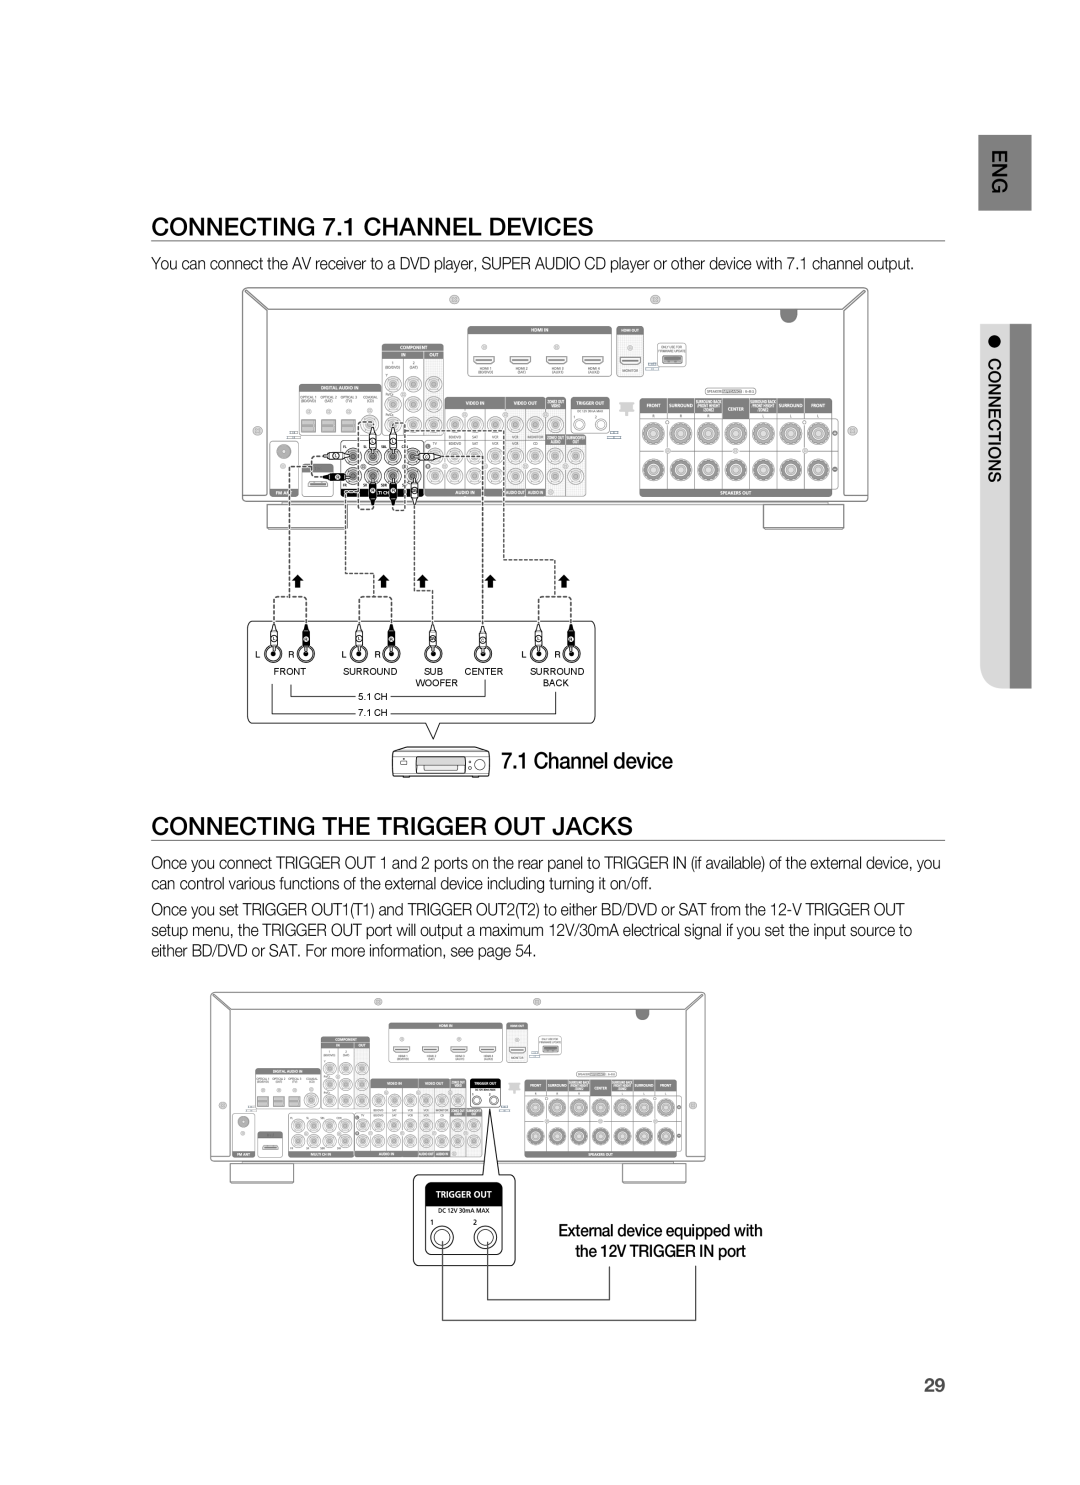 Samsung HW-C900-XAA user manual CONNECTING 7.1 CHANNEL DEVICES, Connecting The Trigger Out Jacks, Channel device 